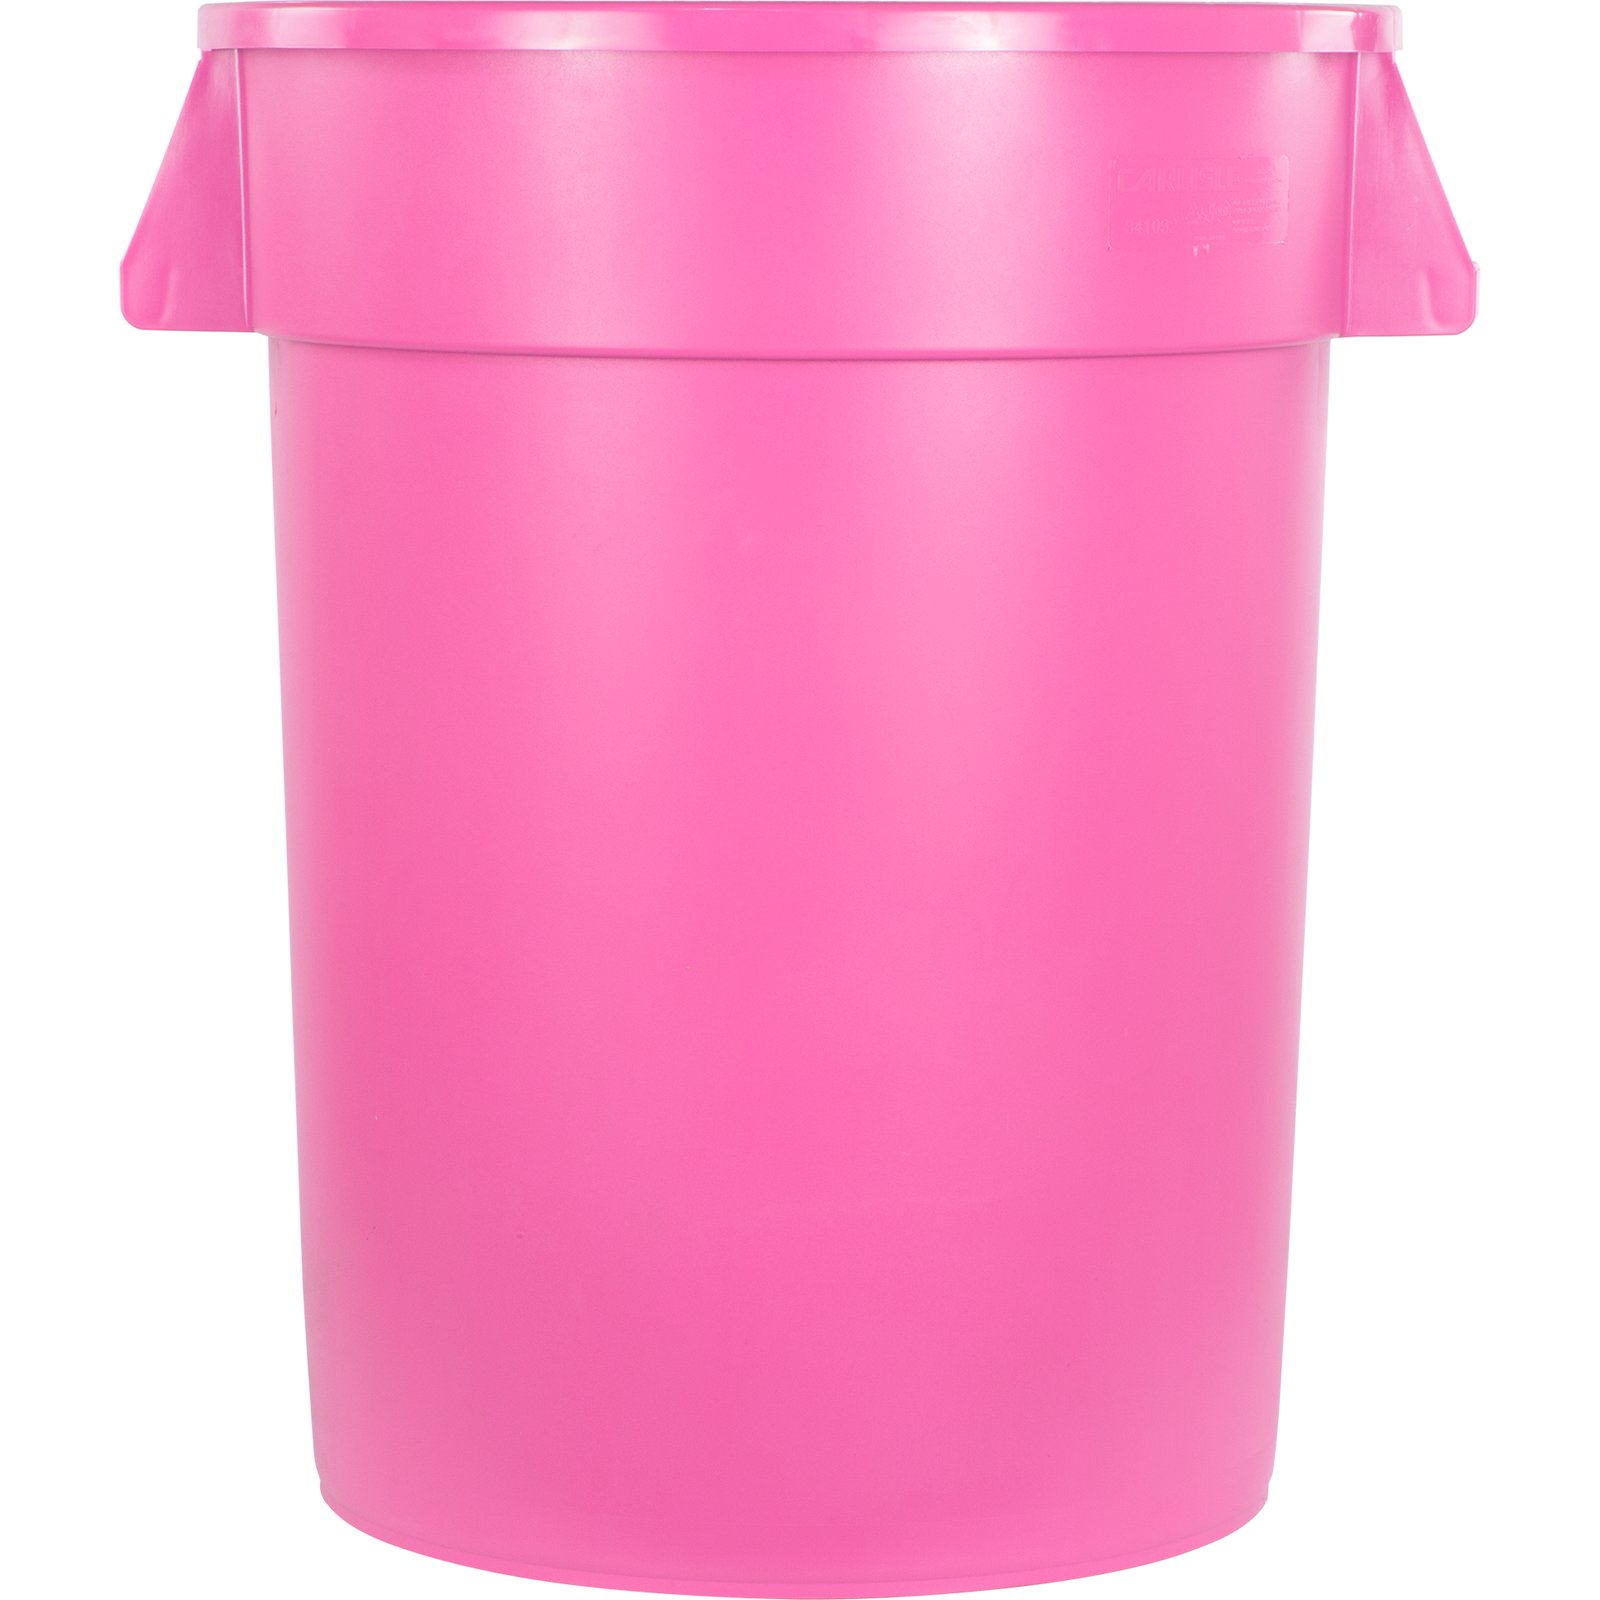 Blue 22.37 x 27-3/4 Carlisle 341032REC14 Bronco LLDPE Recycle Waste Container Capacity 32-gal Case of 4 